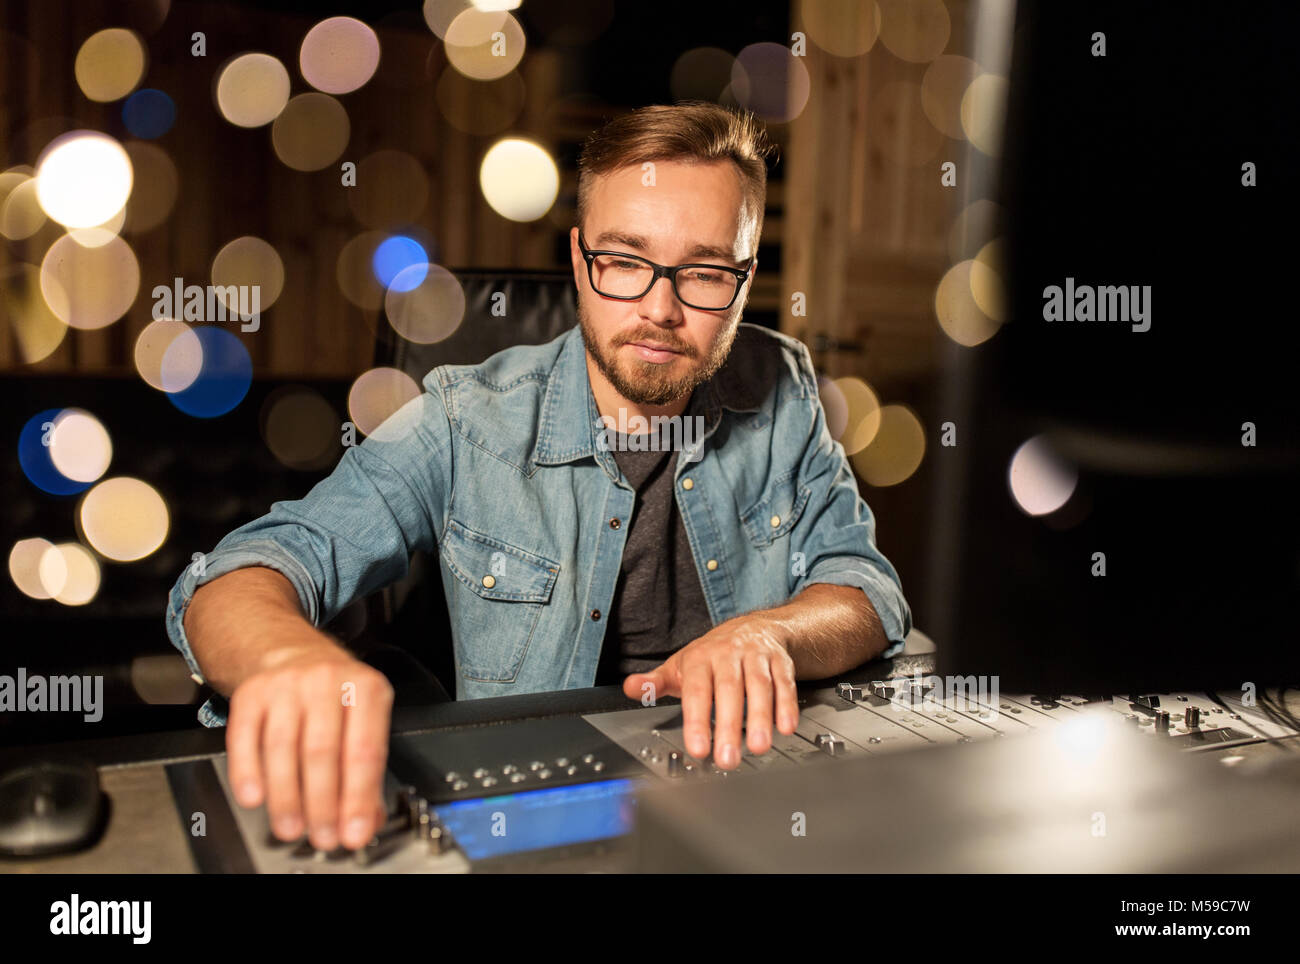 man at mixing console in music recording studio Stock Photo